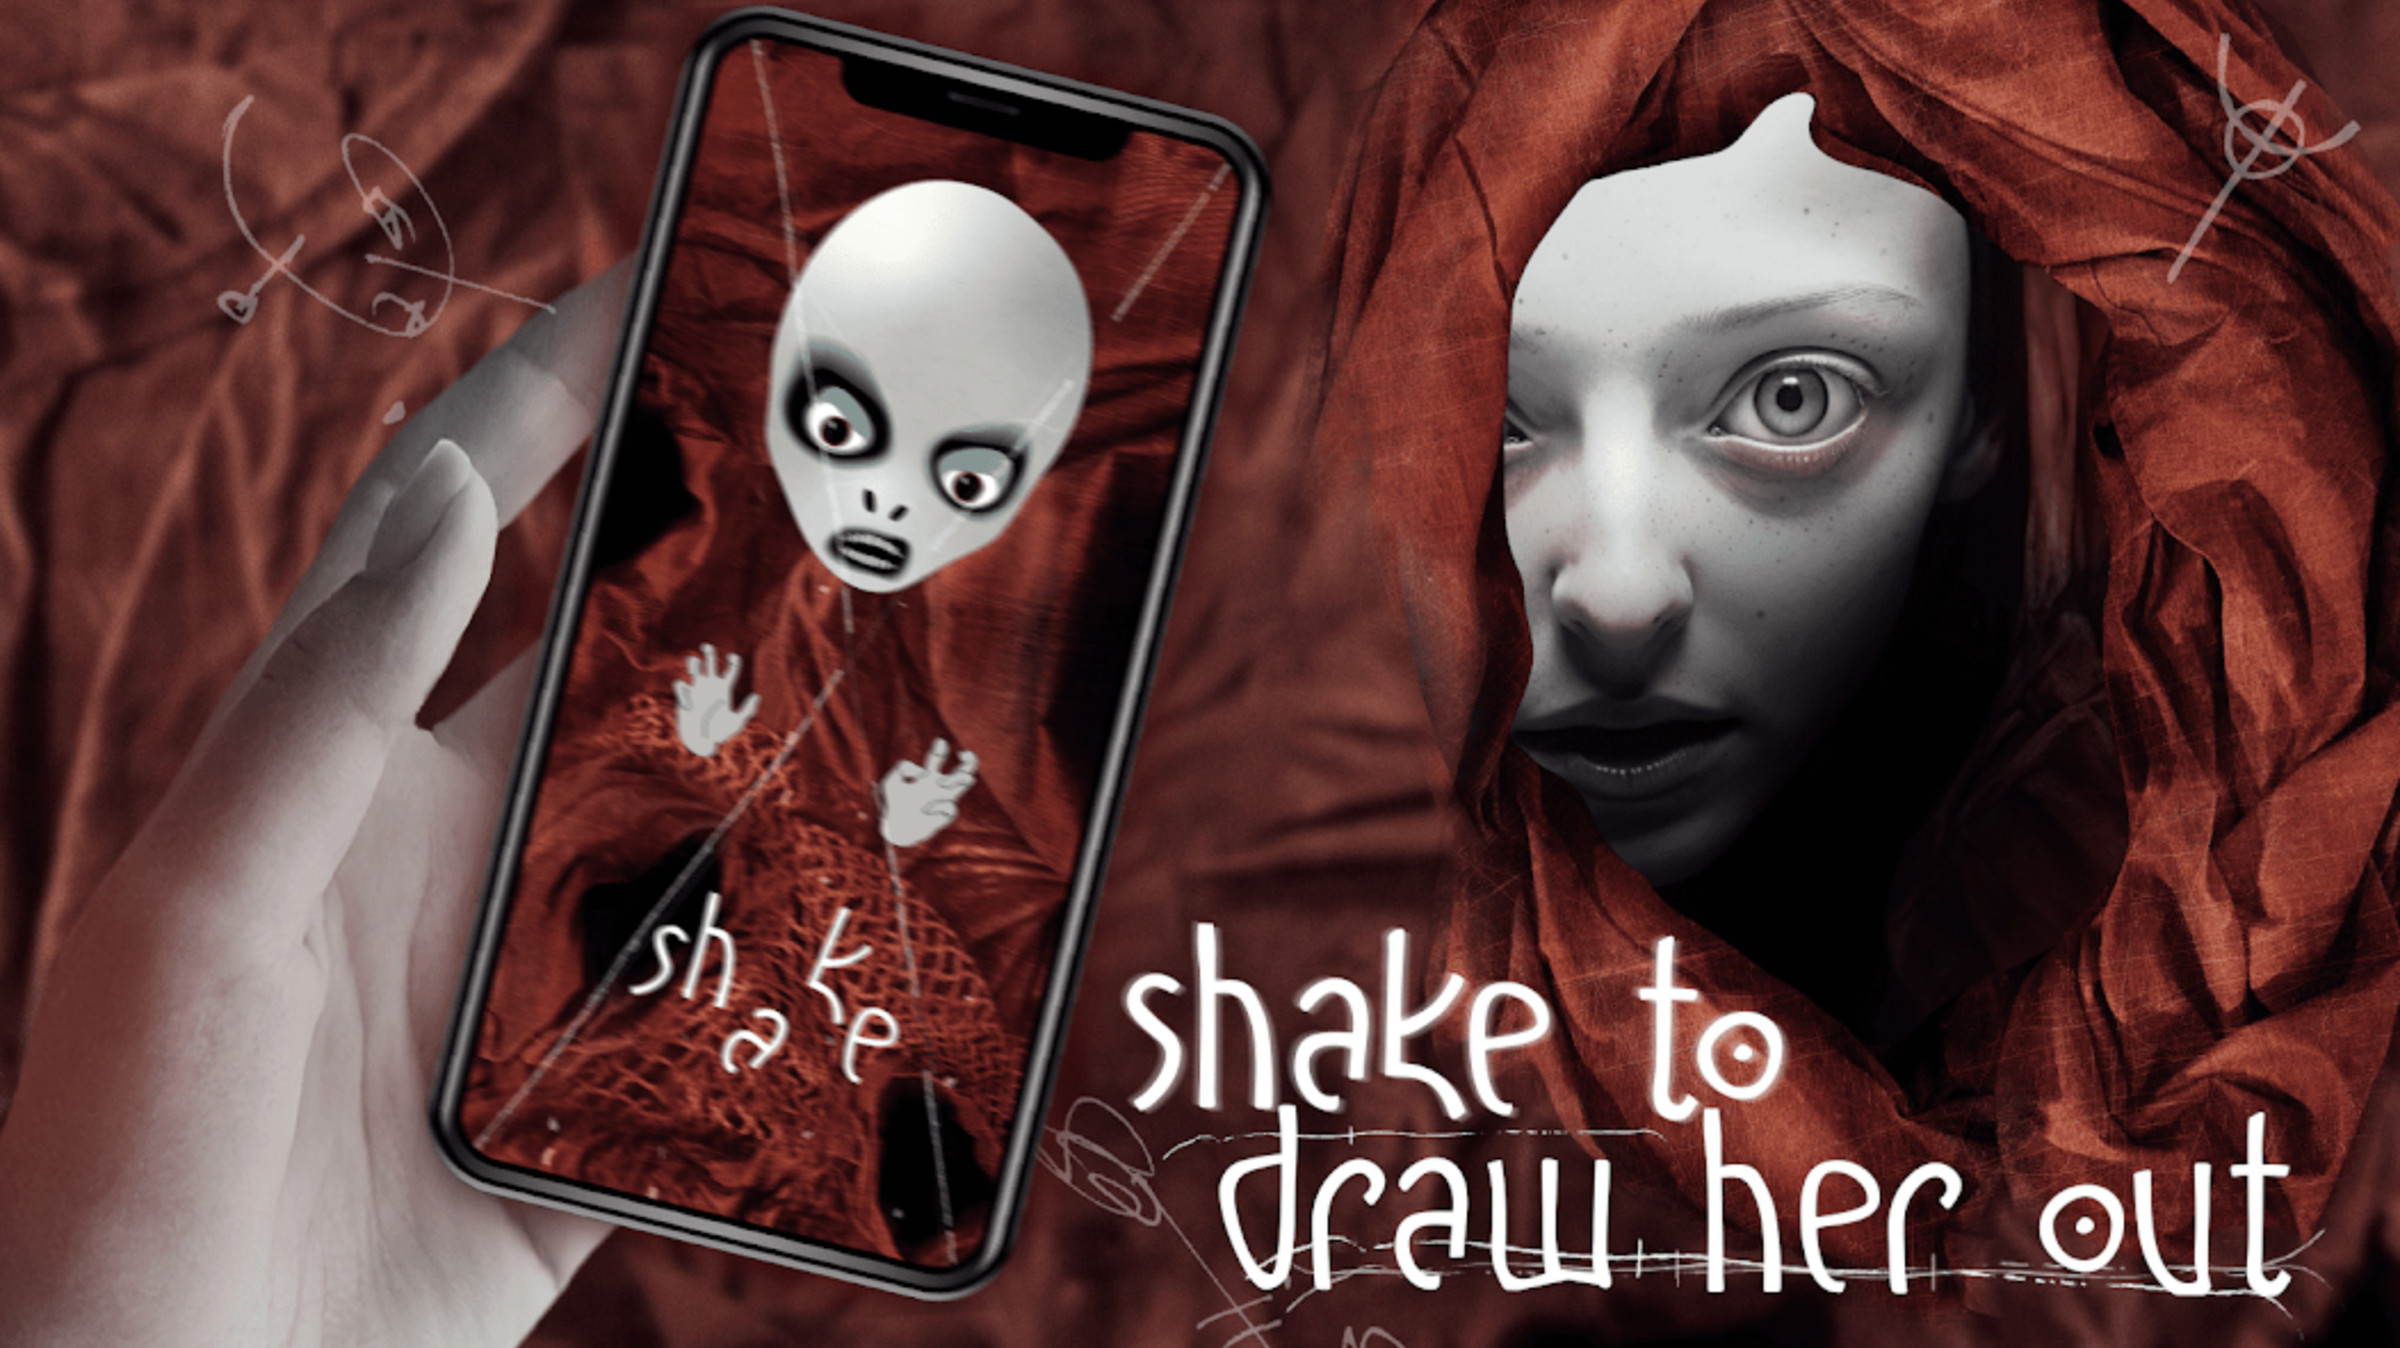 A screenshot of the character Franz looking unhappy beside the text “shake to draw her out.”